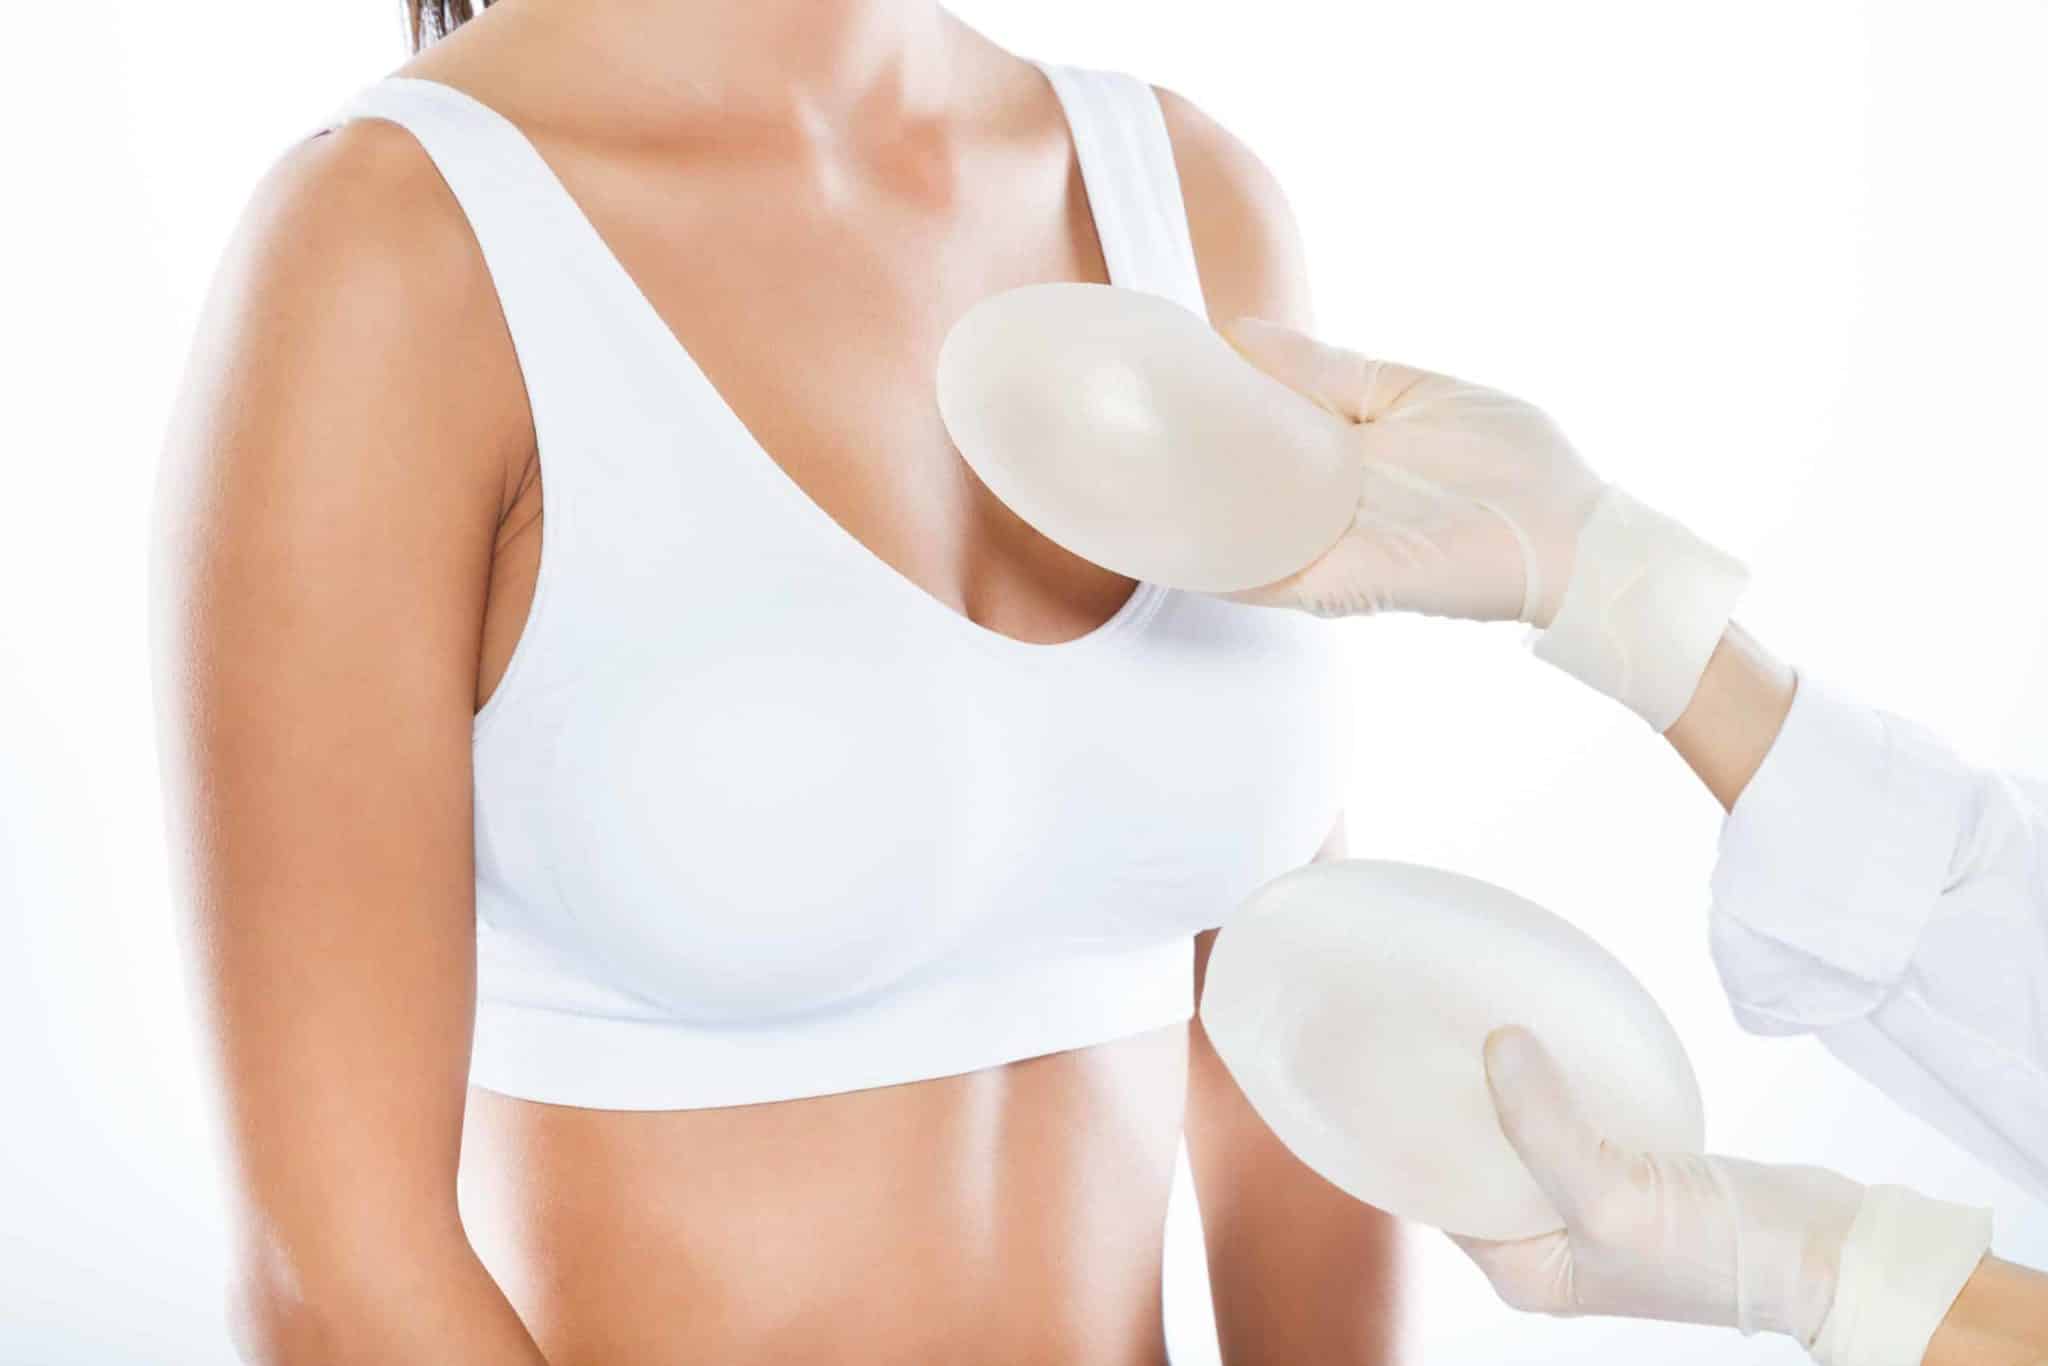 Small Tits: Practical Advice to Embrace and Enhance Small Breasts, by Me  Fareed